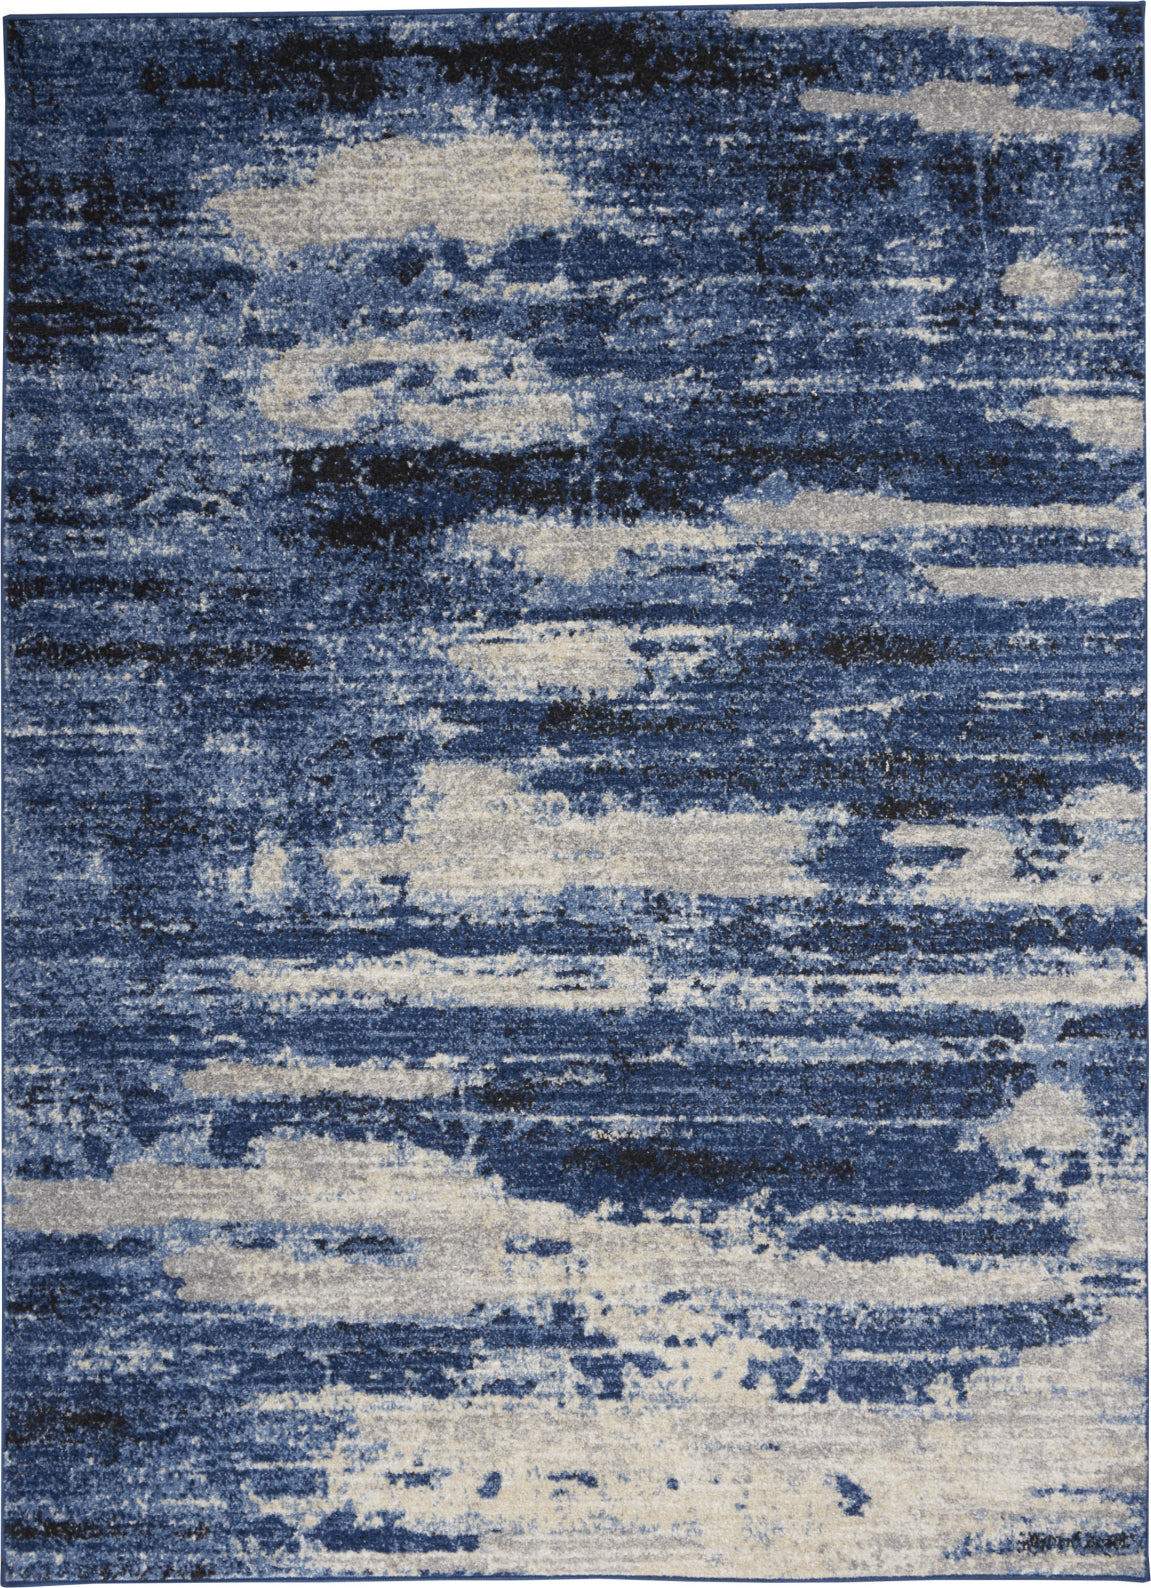 Calvin Klein CK001 River Area Rugs RFV02 Incredible – Blue Decor and Teal/Ivory Flow Rug